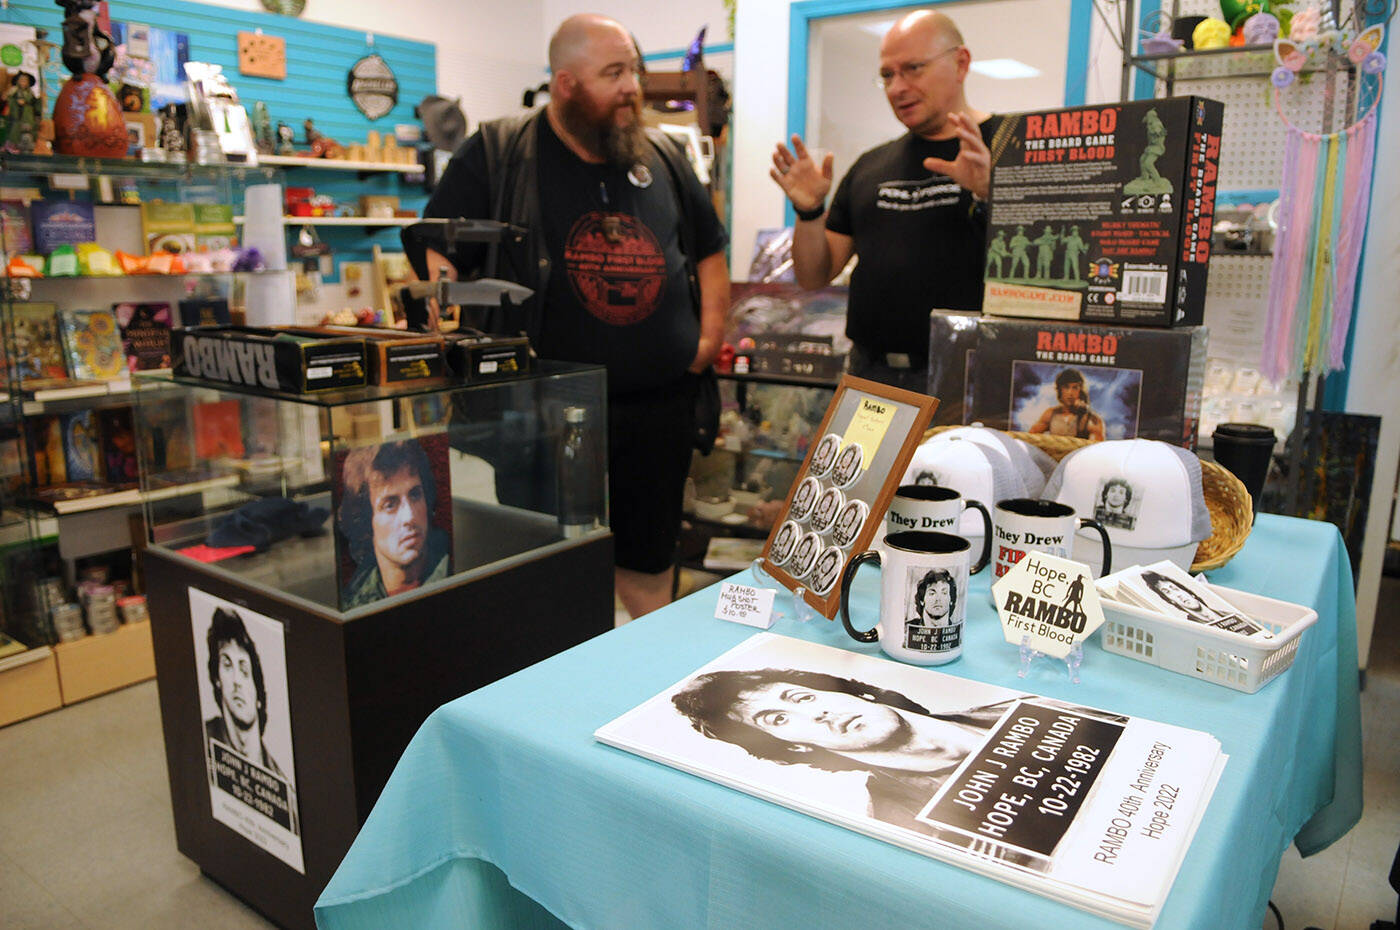 There were many souvenirs for sale at Kerfuffle Creations during the Rambo First Blood 40th Anniversary celebrations in Hope on Saturday, Oct. 8, 2022. (Jenna Hauck/ Black Press Media)